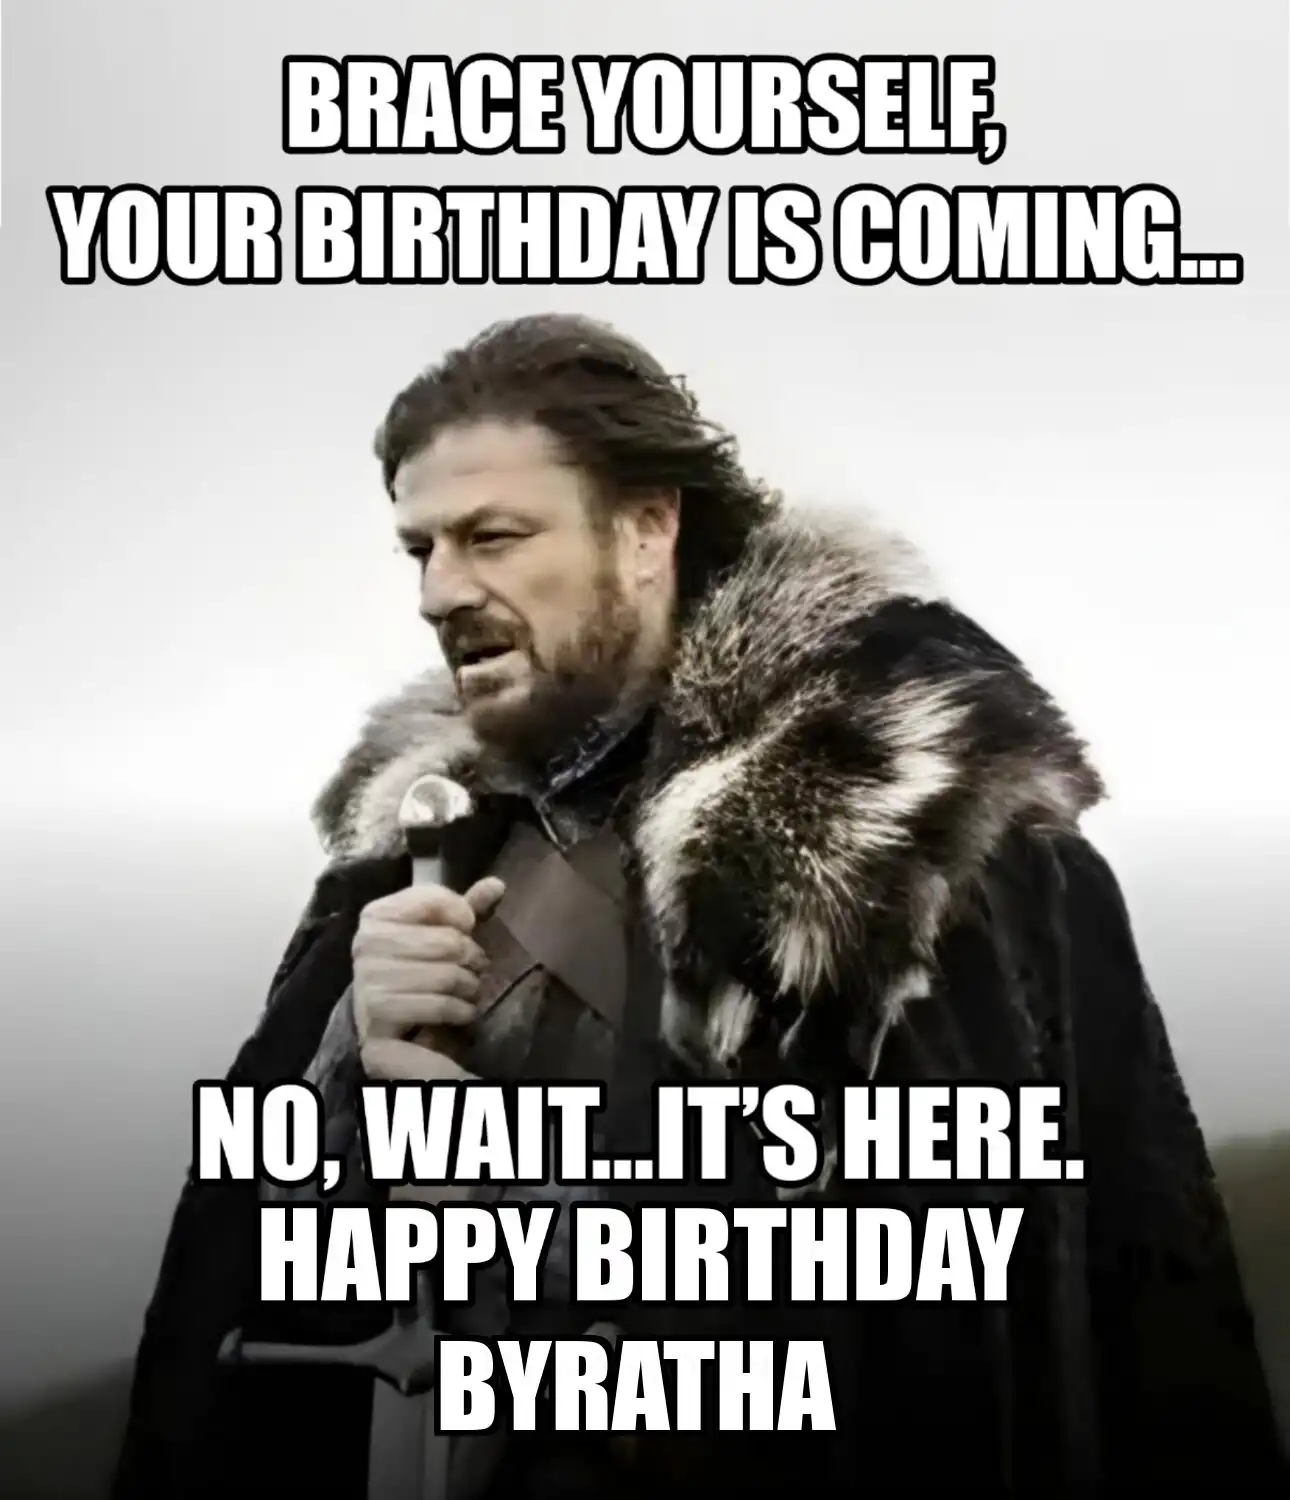 Happy Birthday Byratha Brace Yourself Your Birthday Is Coming Meme